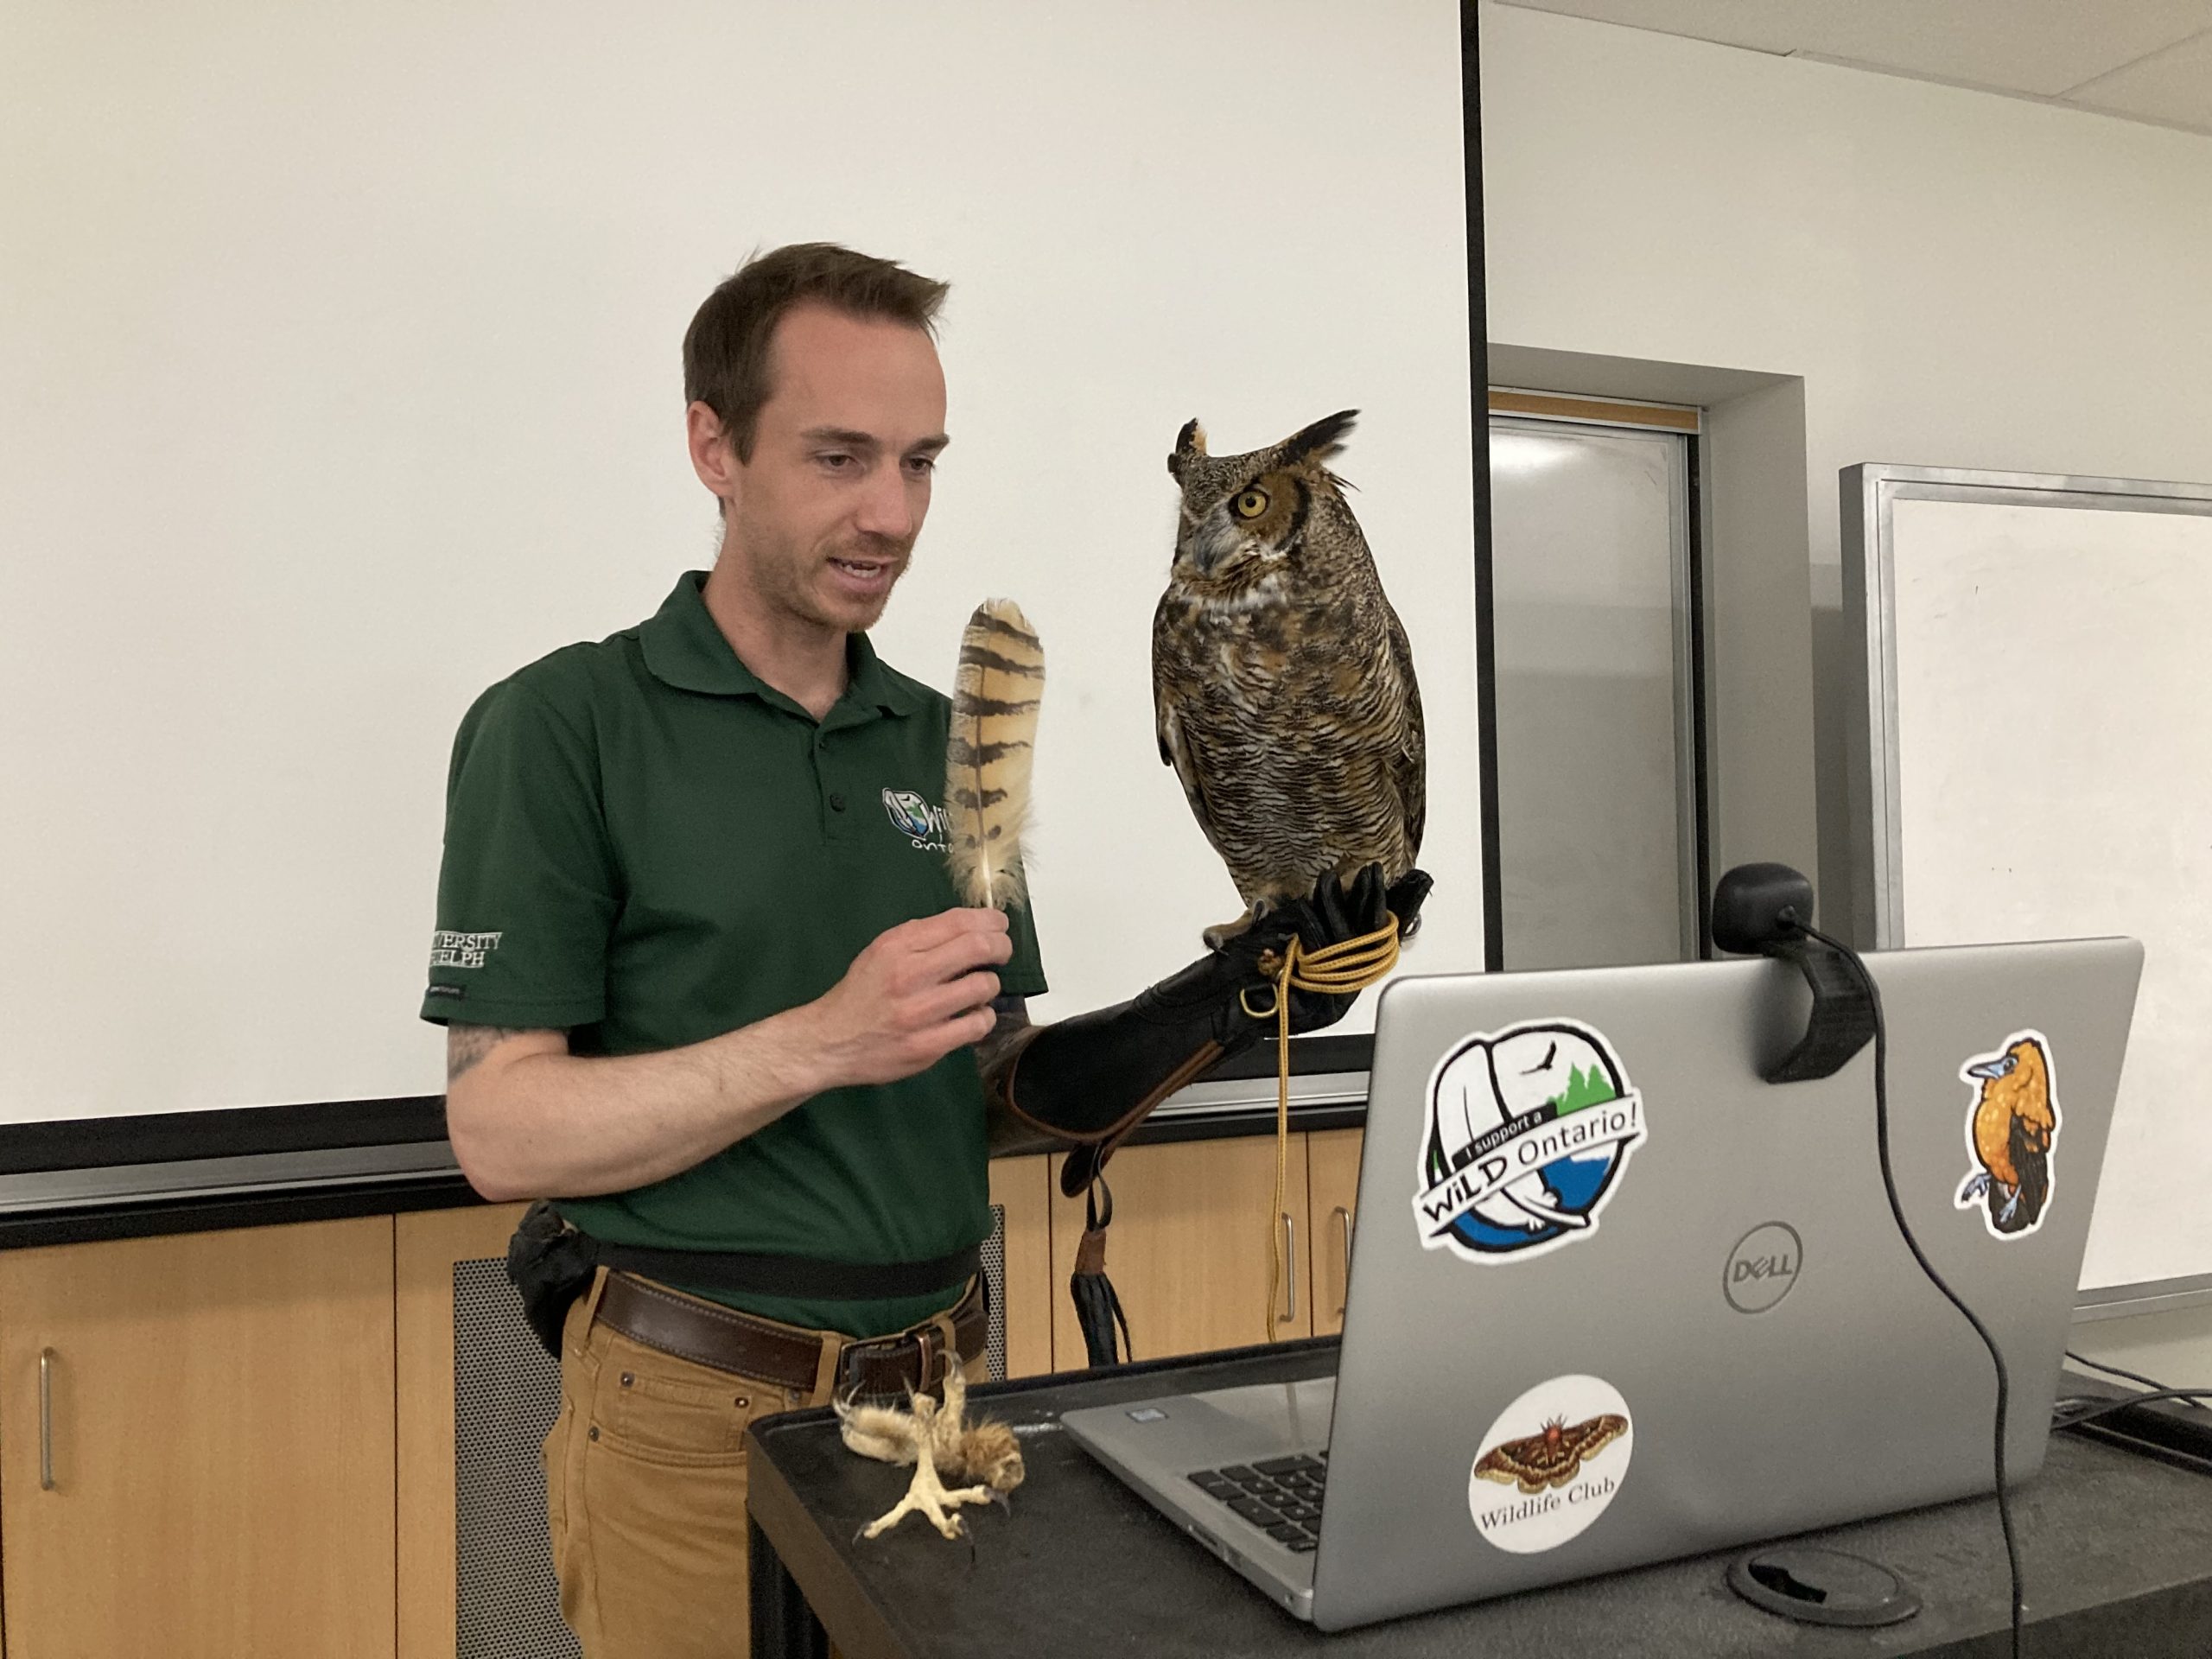 a man with an owl speaks to a laptop with a camera